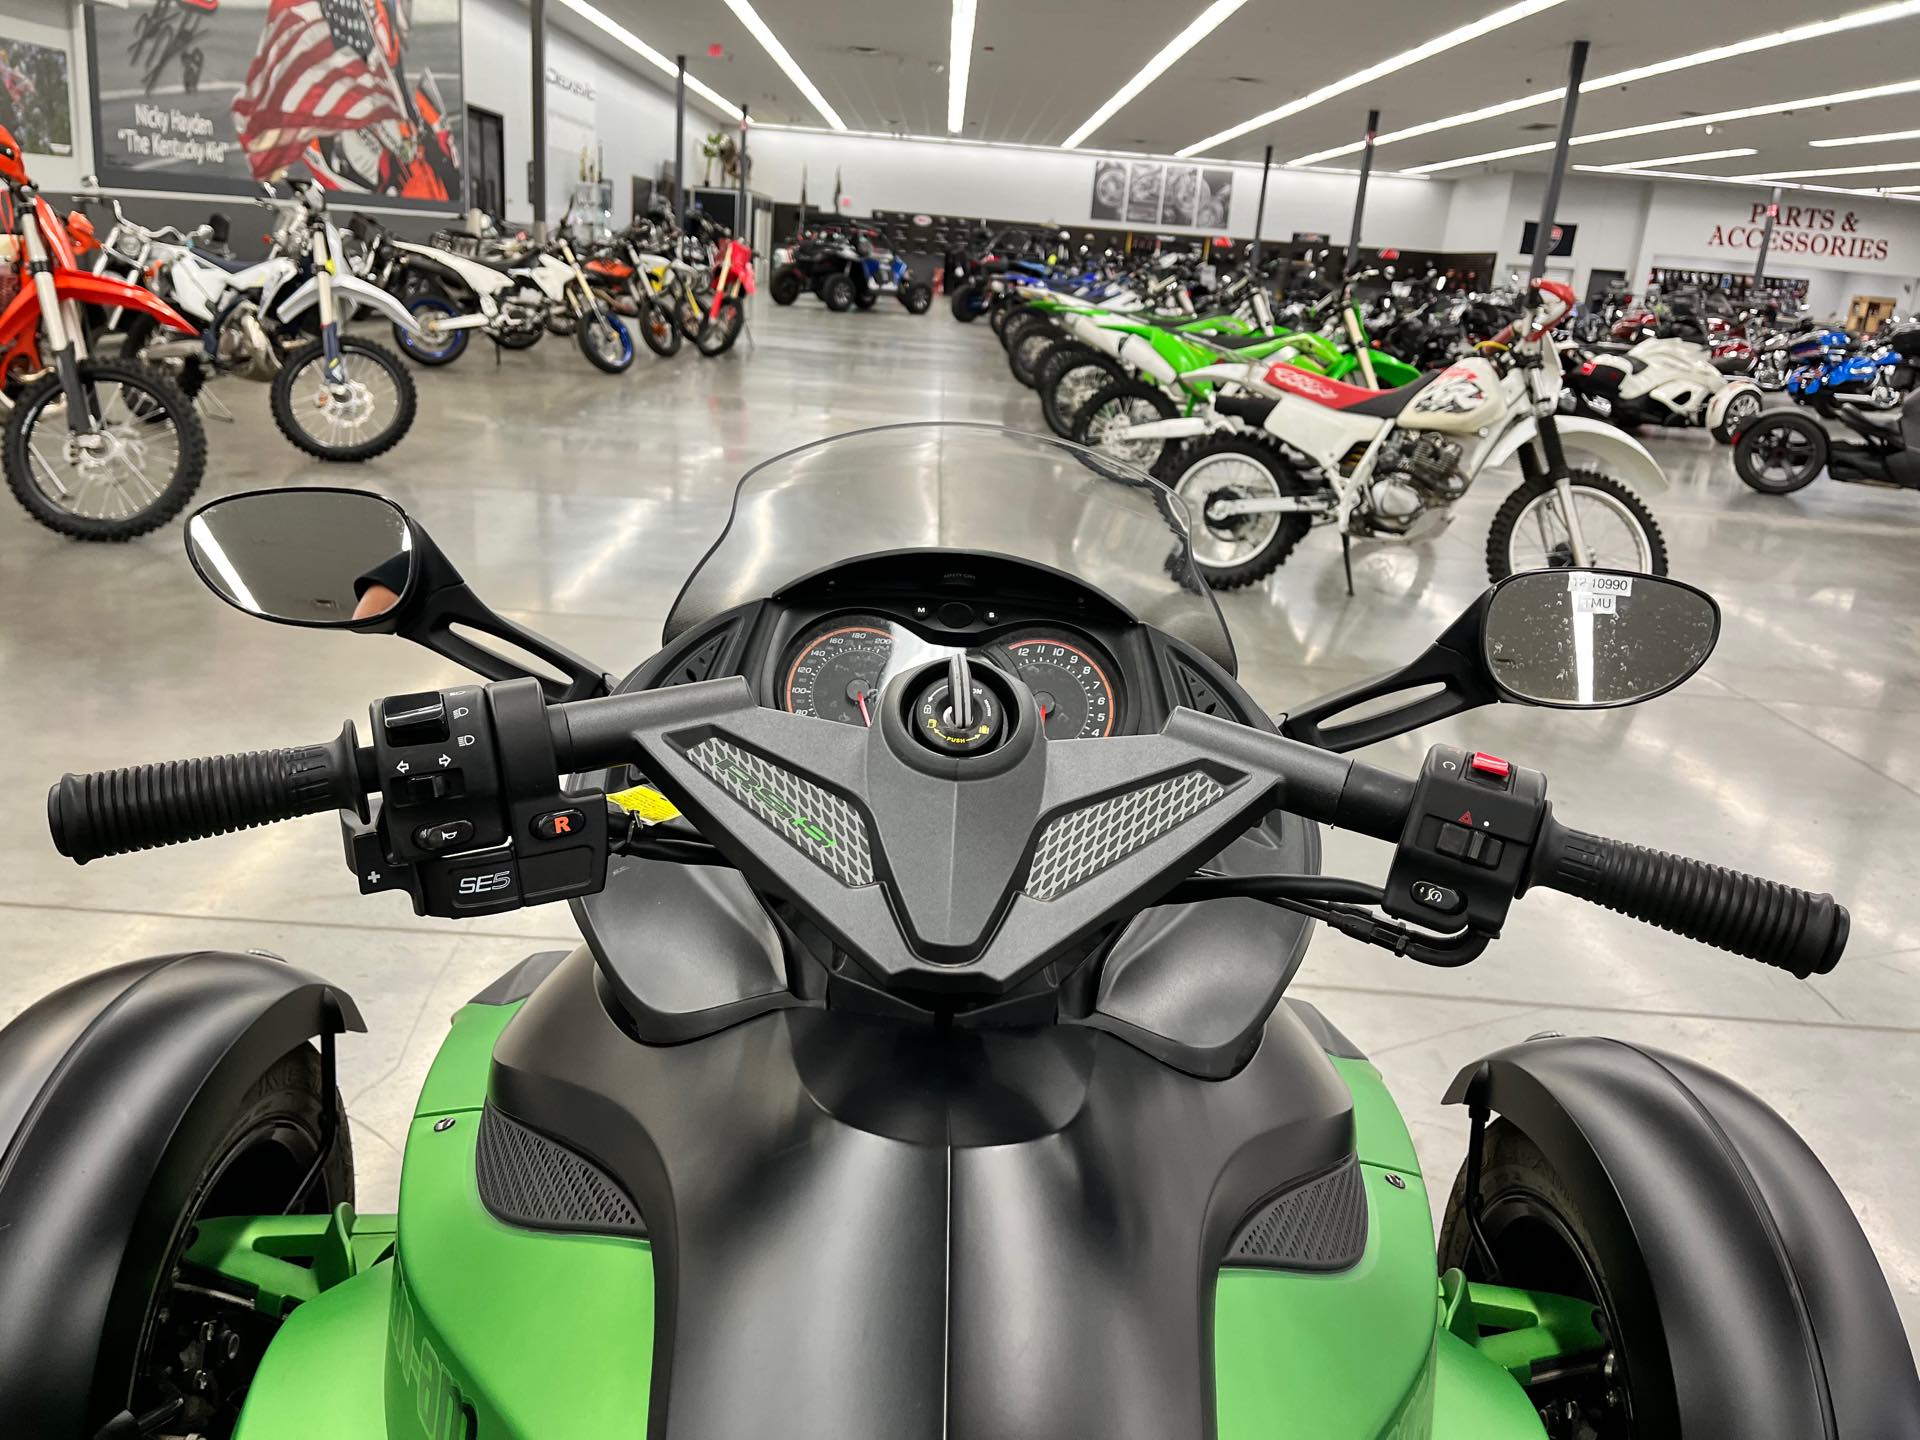 2012 Can-Am Spyder Roadster RS-S at Aces Motorcycles - Denver